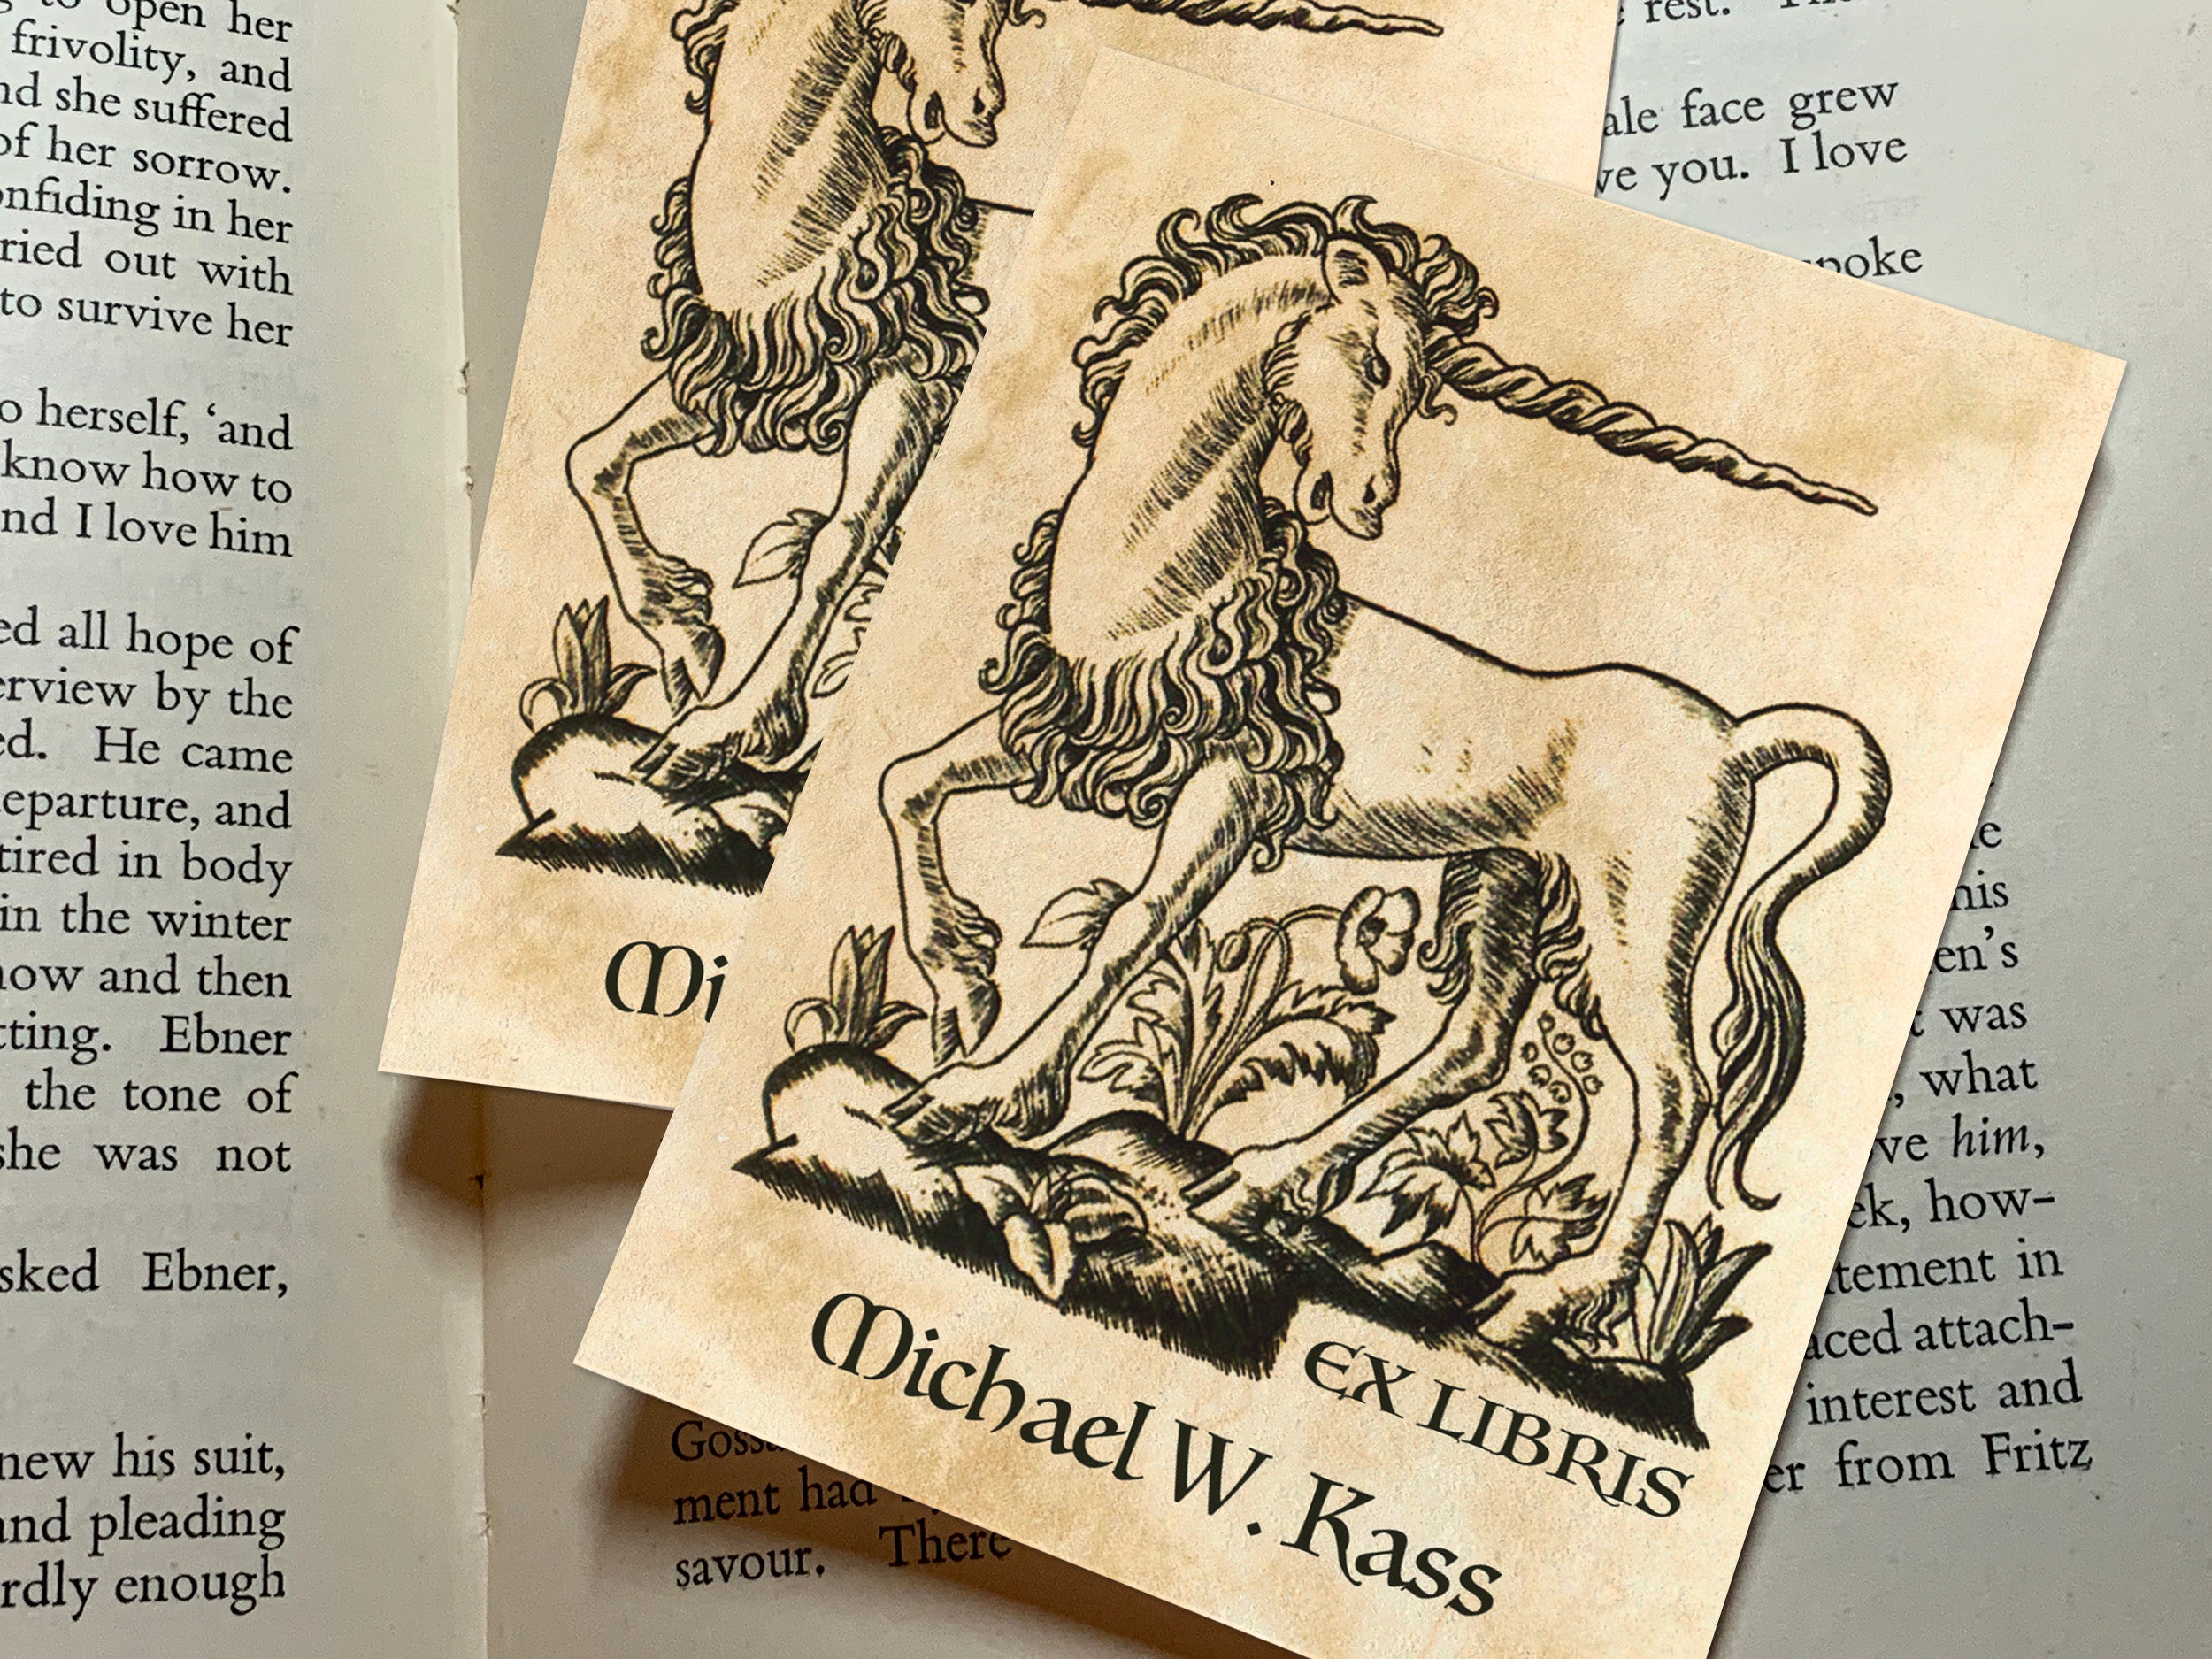 Medieval Unicorn, Personalized Ex-Libris Bookplates, Crafted on Traditional Gummed Paper, 3in x 4in, Set of 30